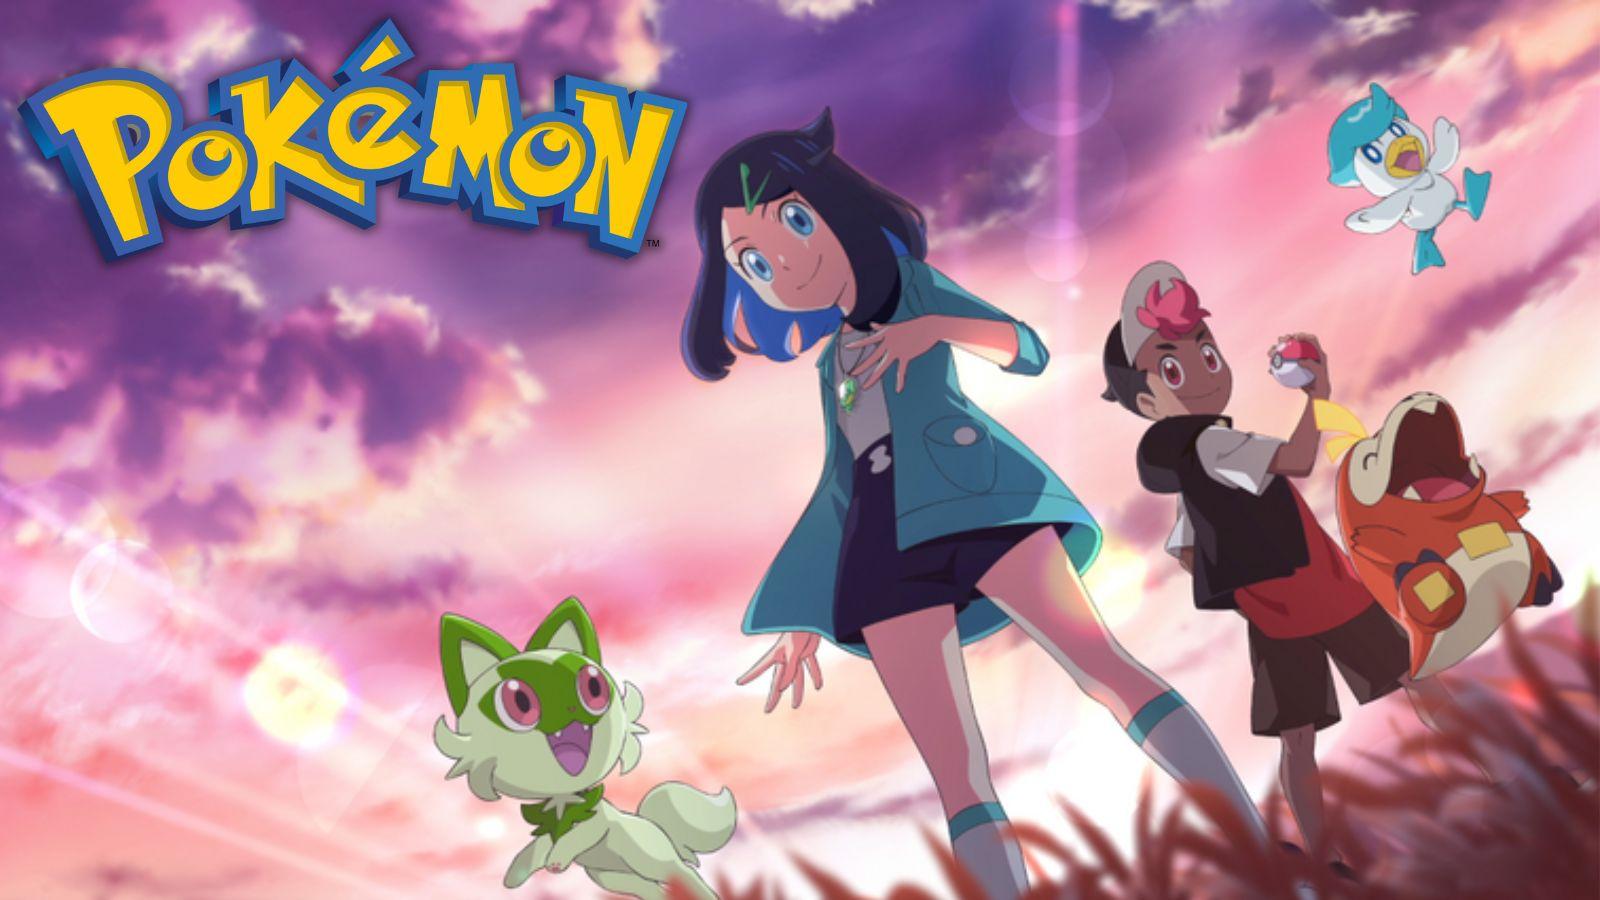 How to watch the Pokemon Anime online in 2021